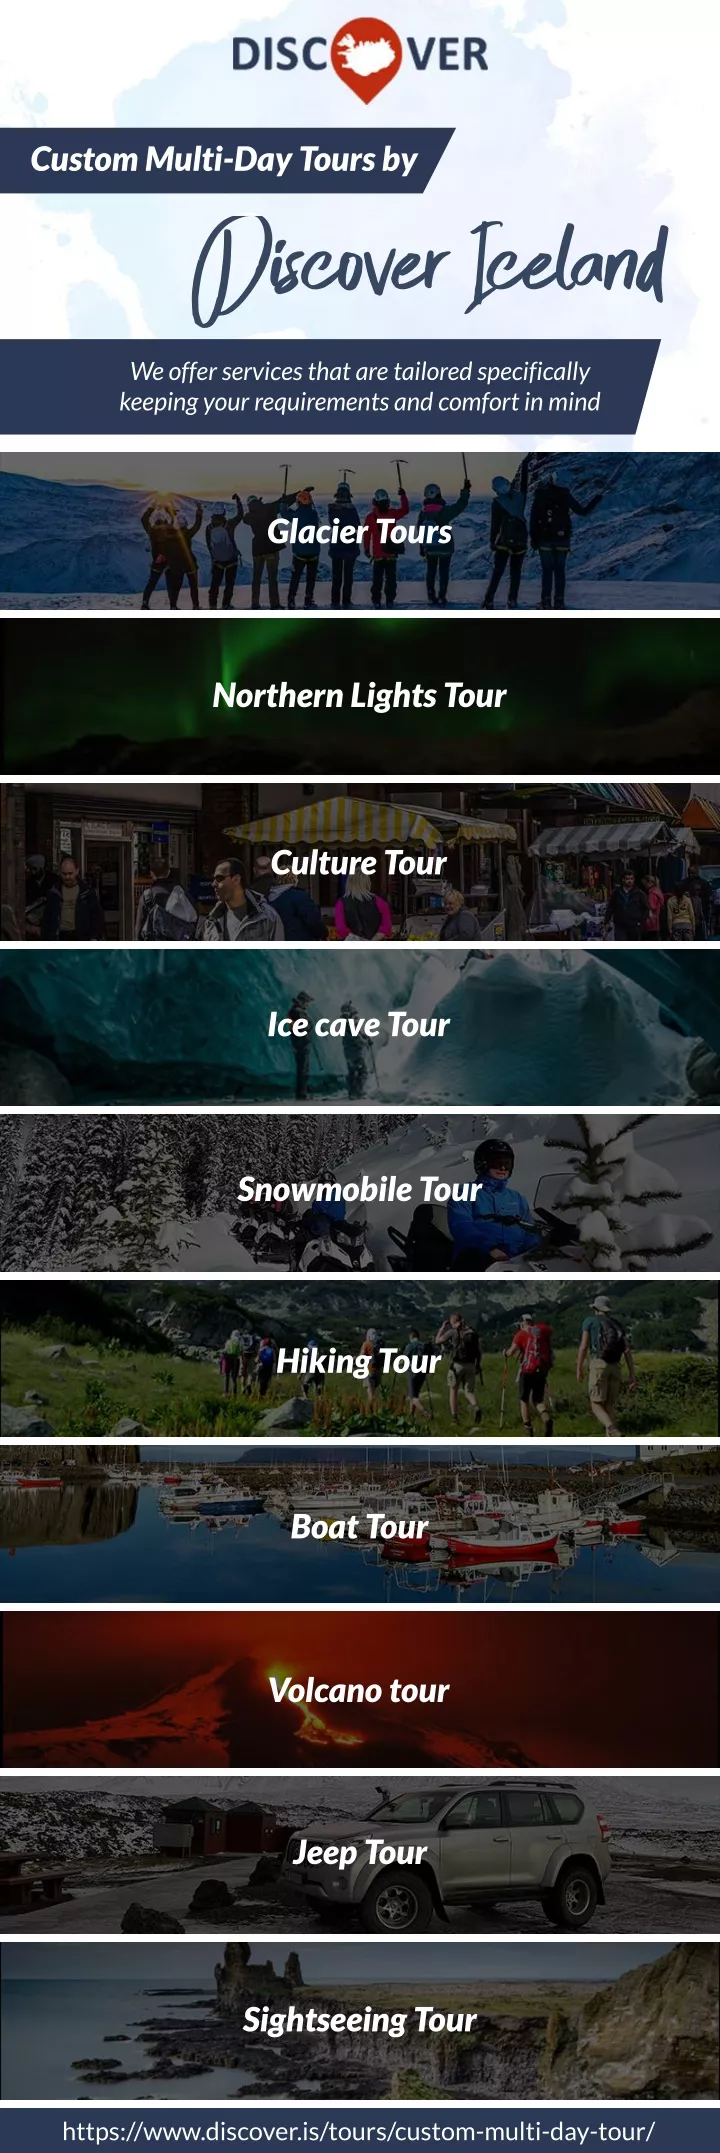 custom multi day tours by discover iceland